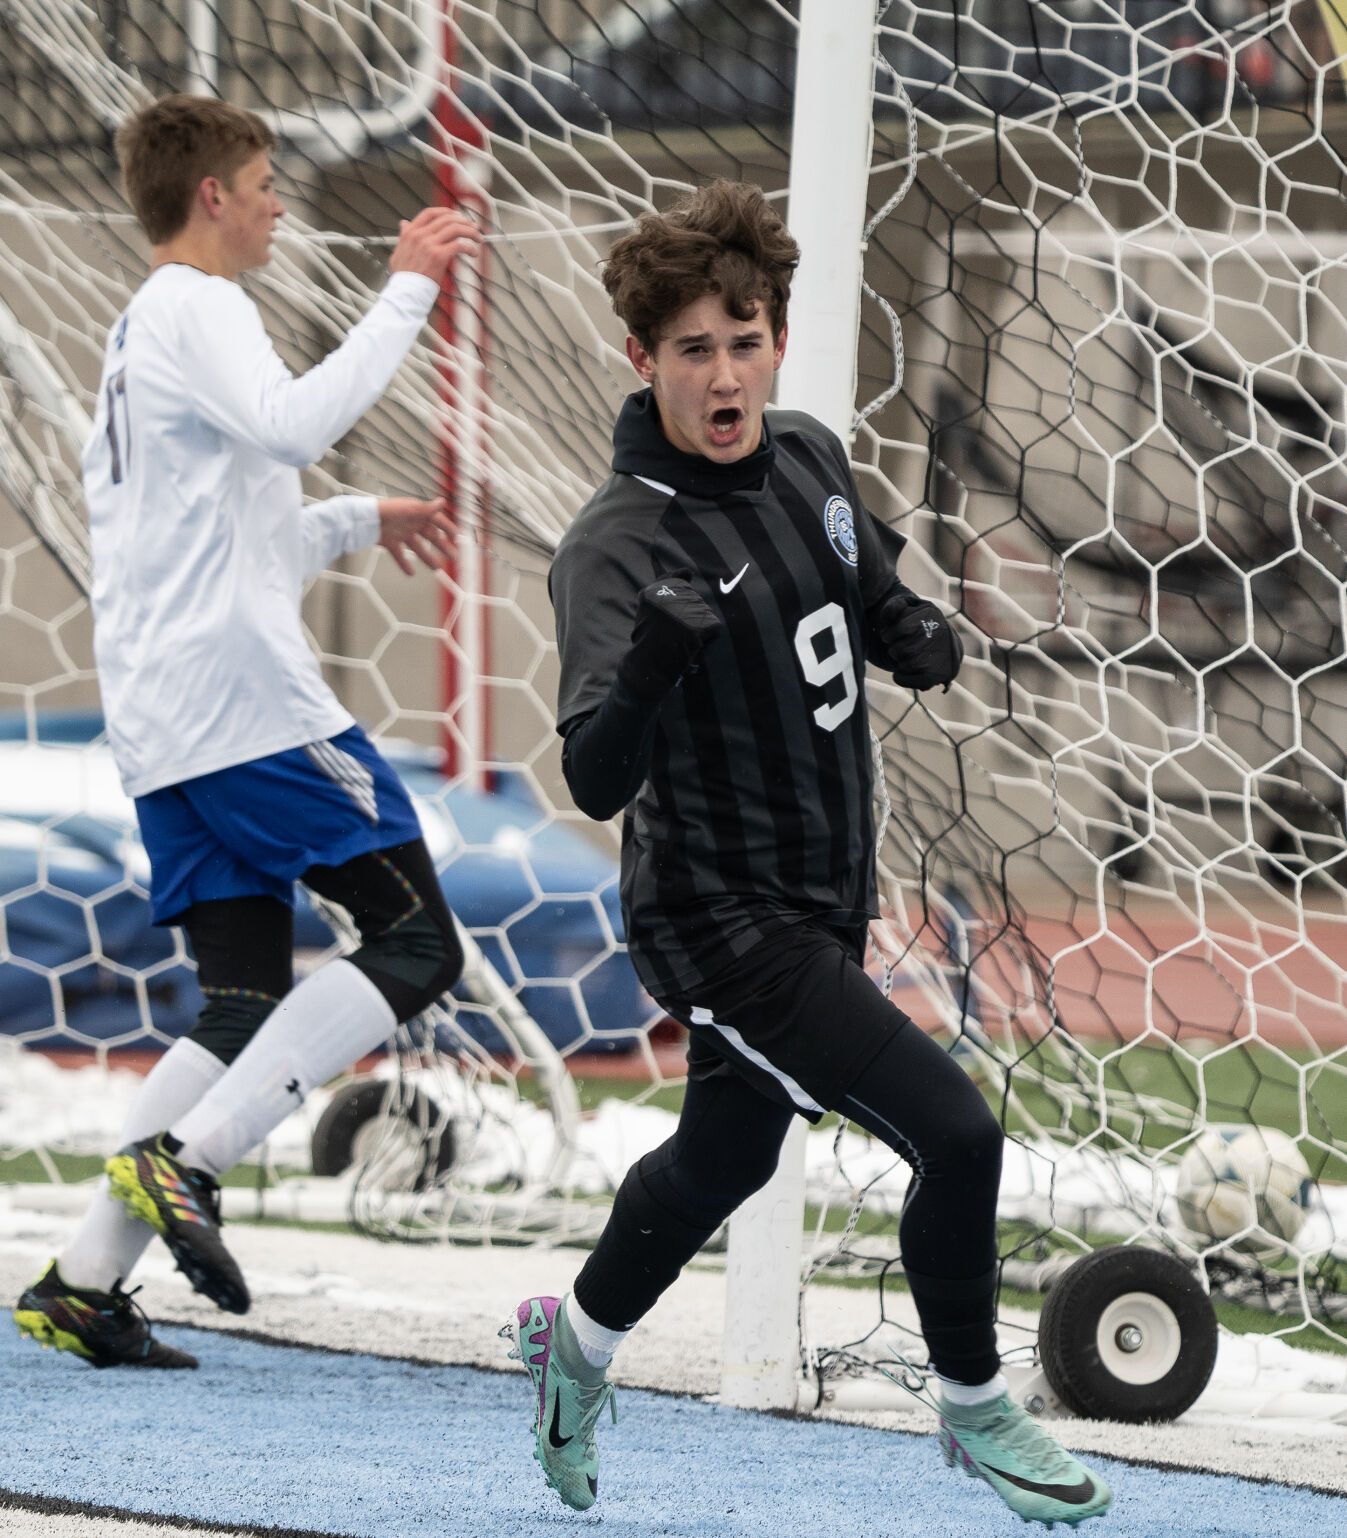 Exciting Soccer Match Ends in Thrilling 4-4 Tie Between Cheyenne East and Thunder Basin